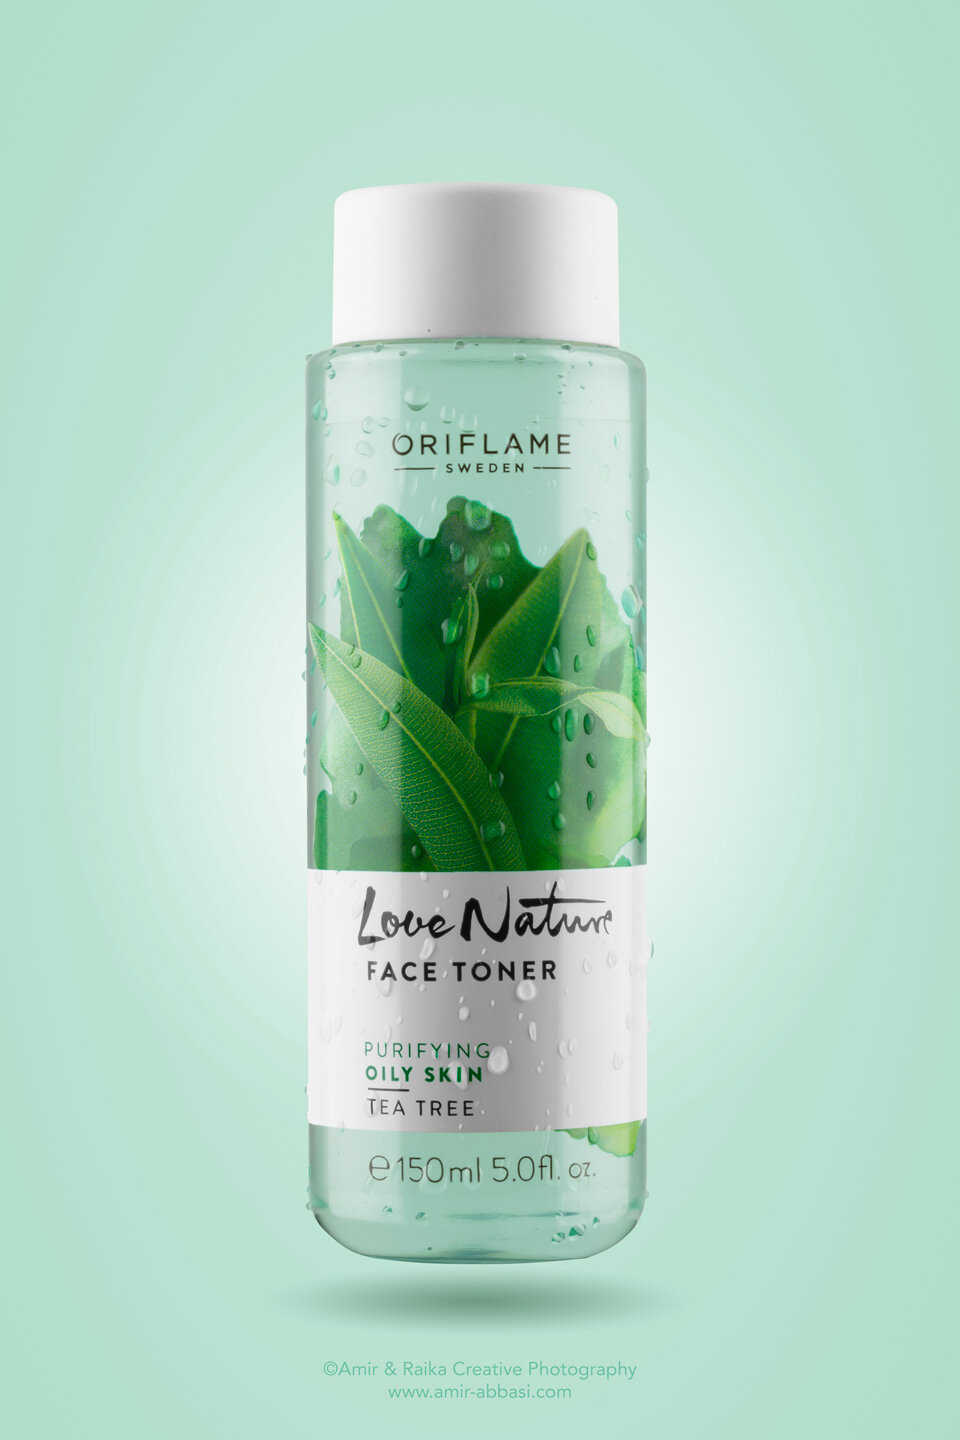 Oriflame Cosmetics product photography